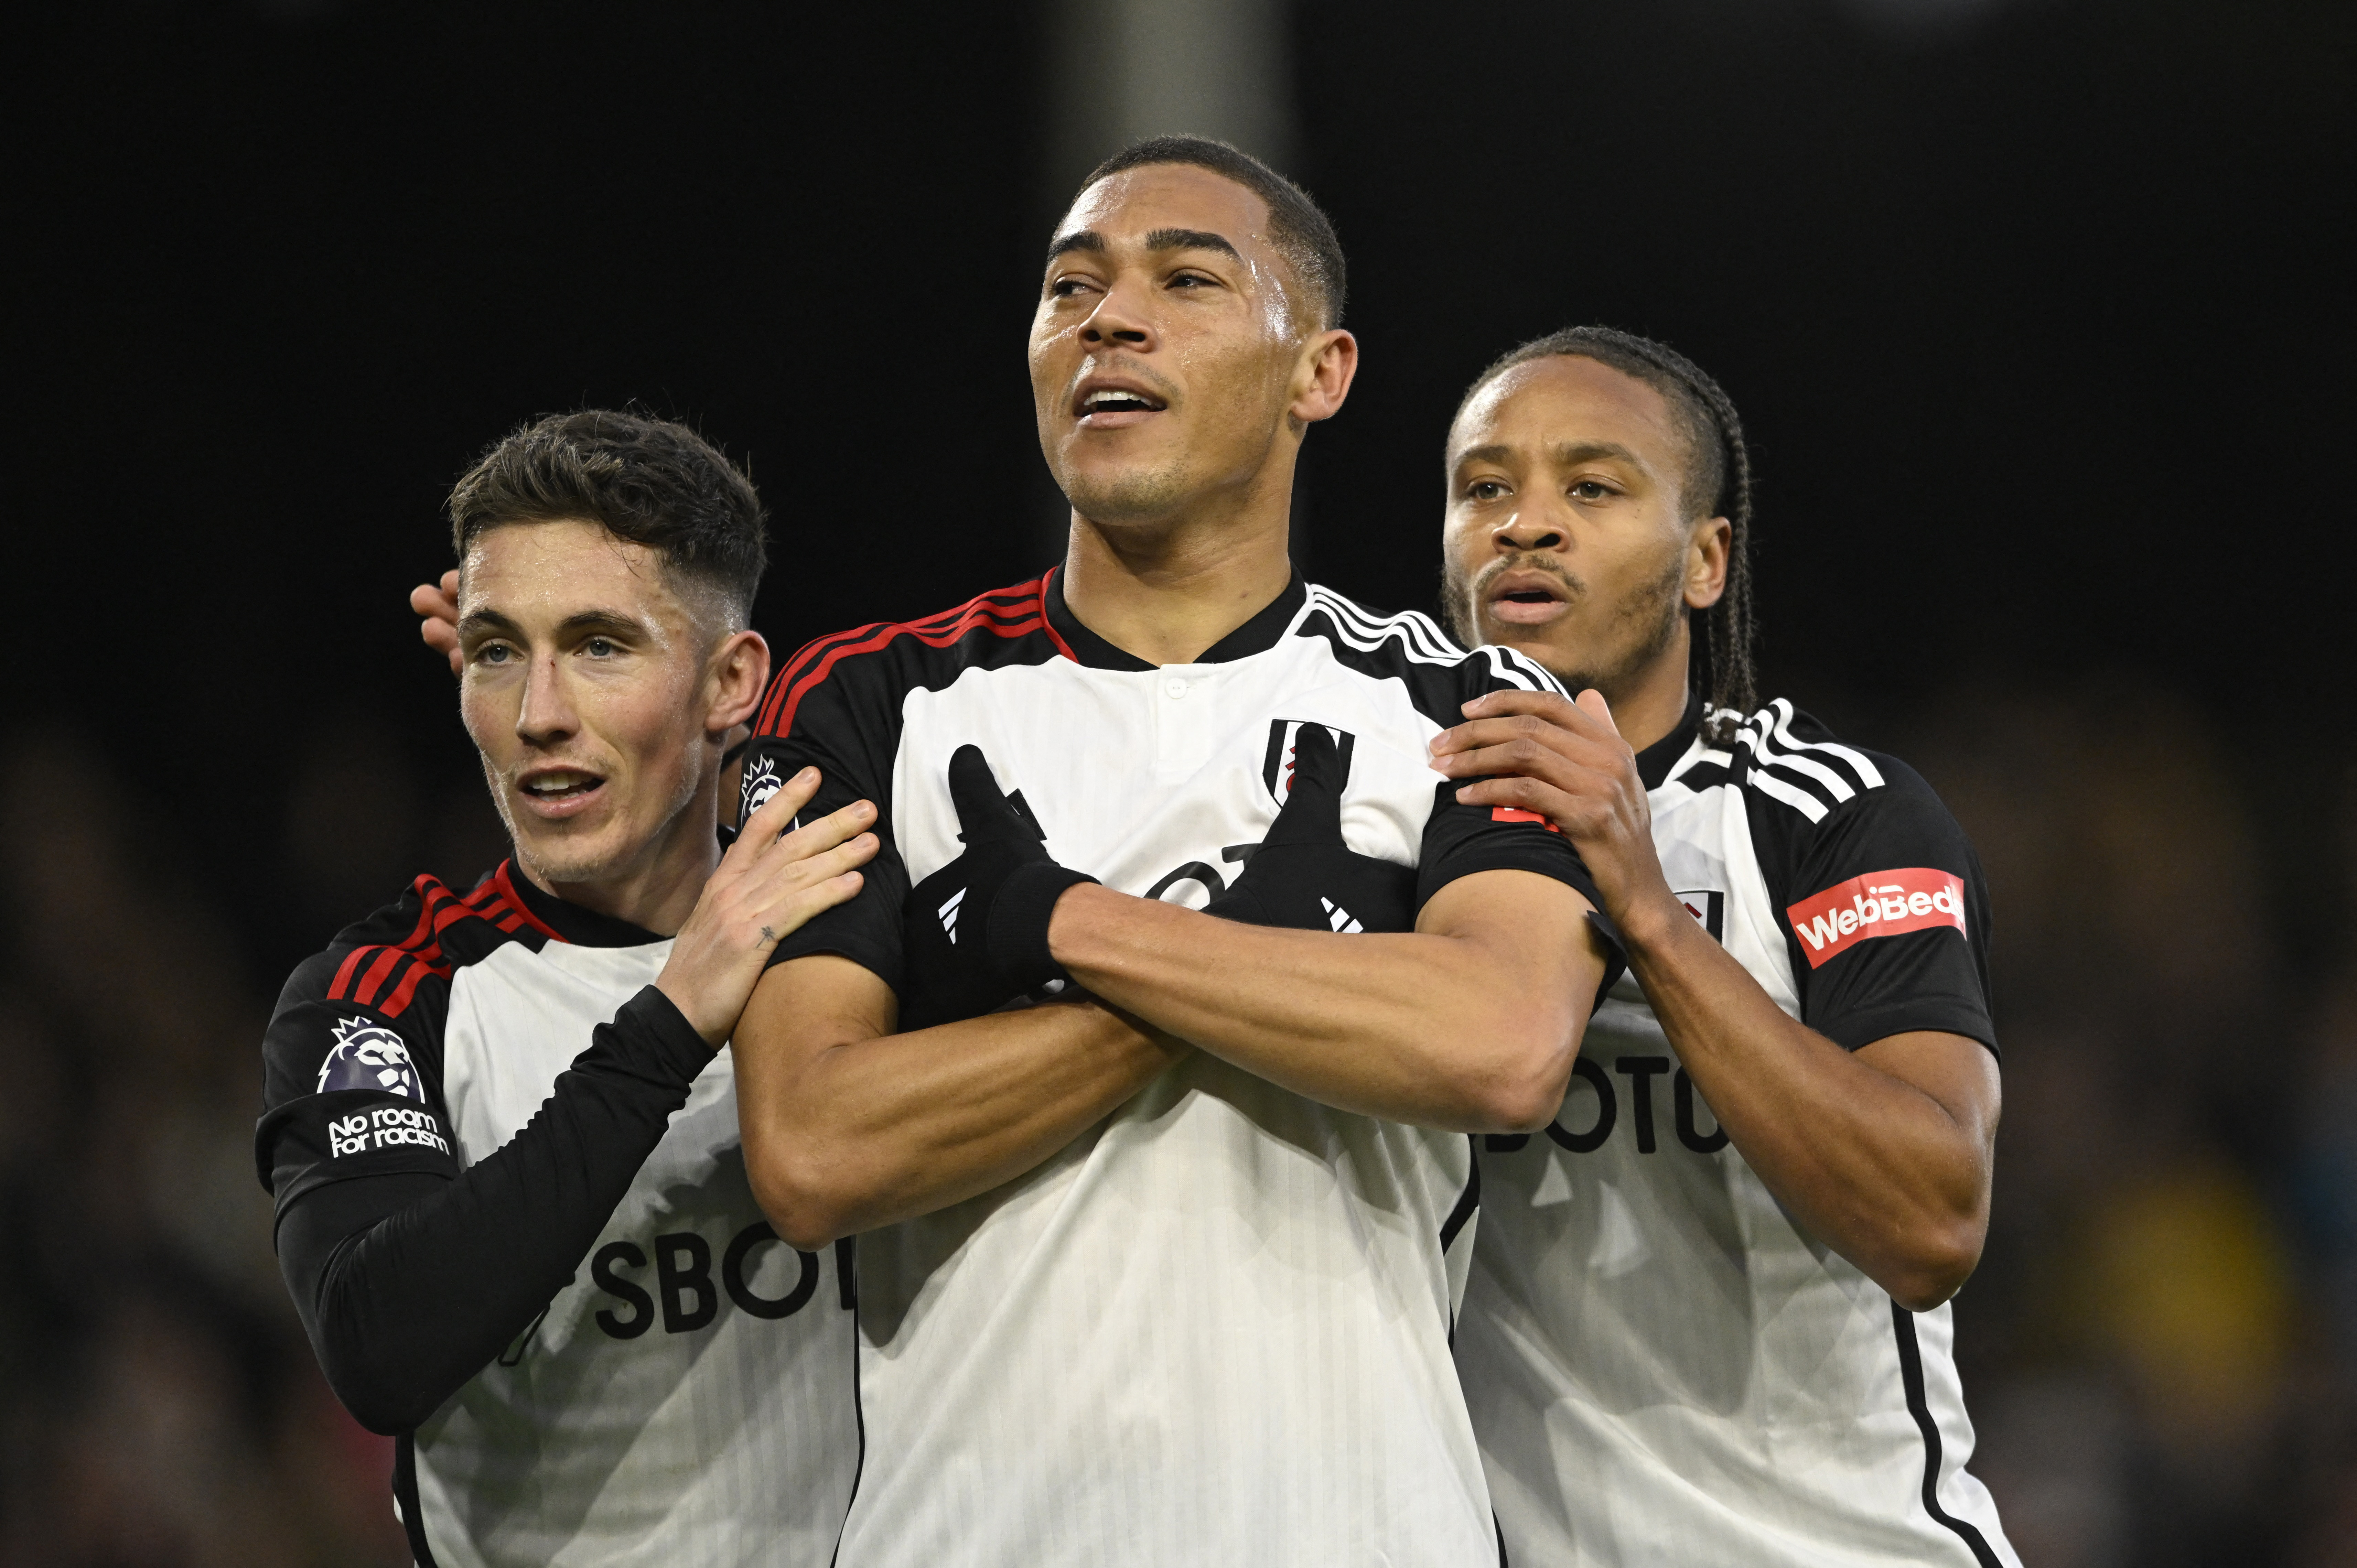 Fulham wins 5-0 in Premier League for 2nd time in 4 days after thrashing  West Ham